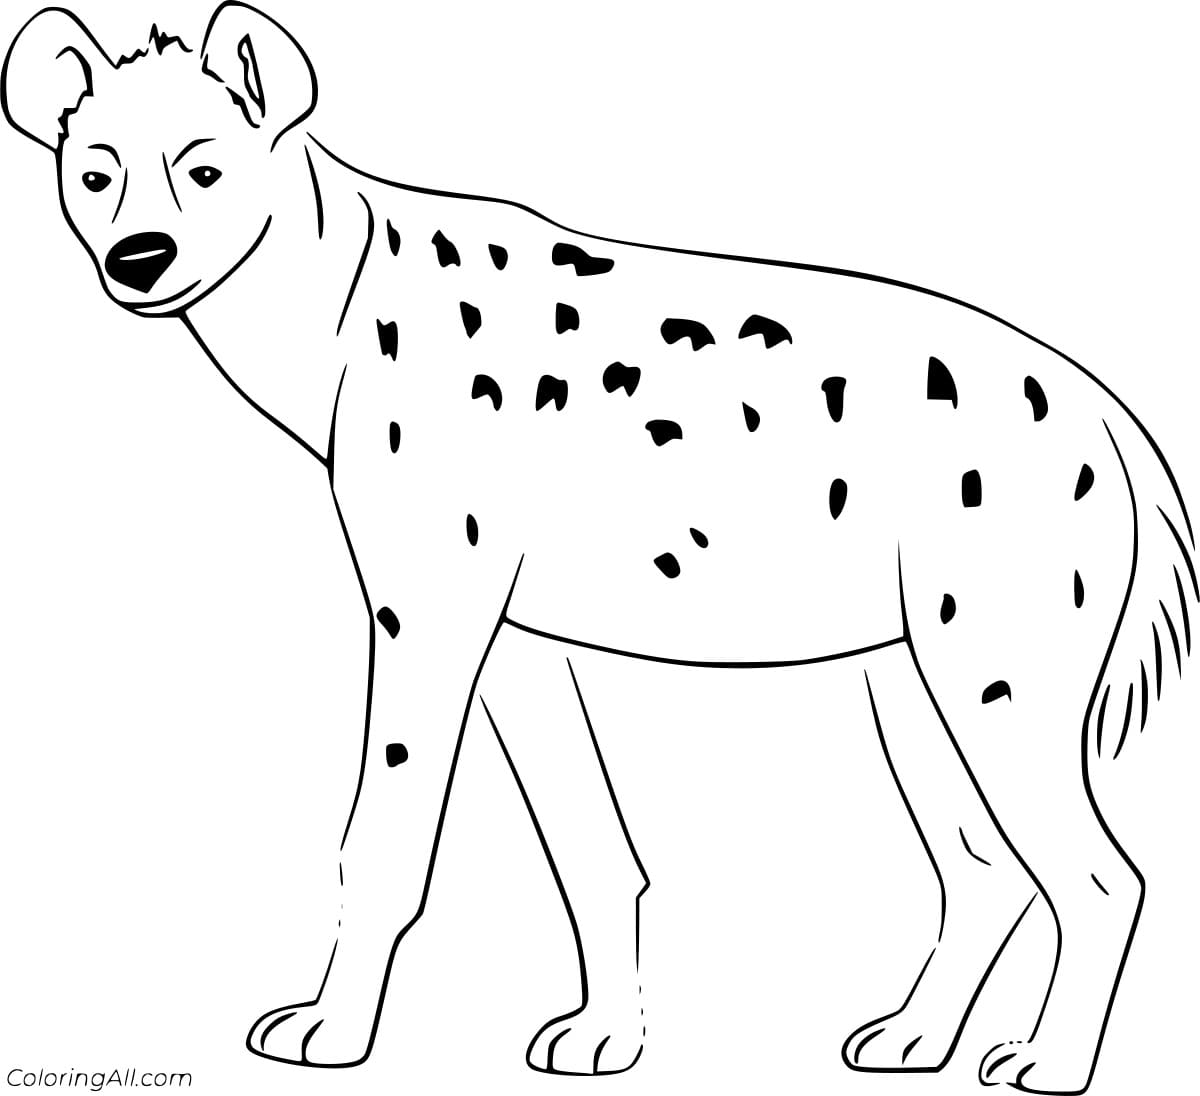 Easy Realistic Hyena Free Coloring Page